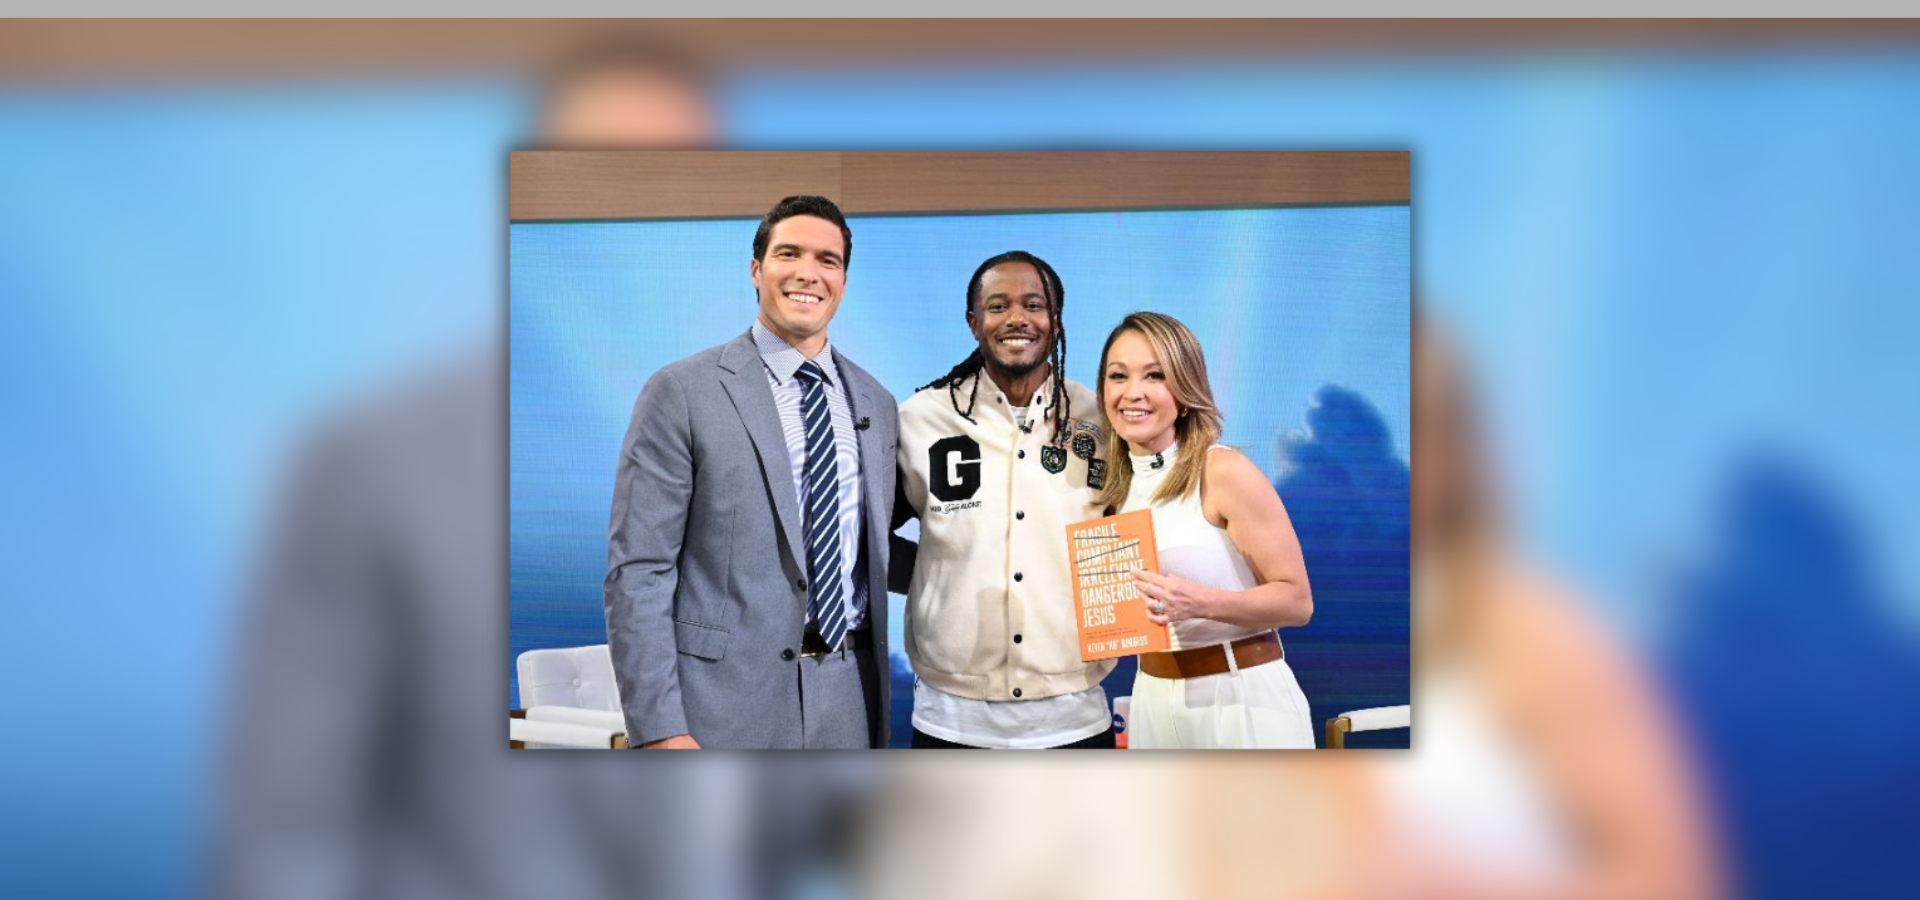 KB Appears on Good Morning America GMA3